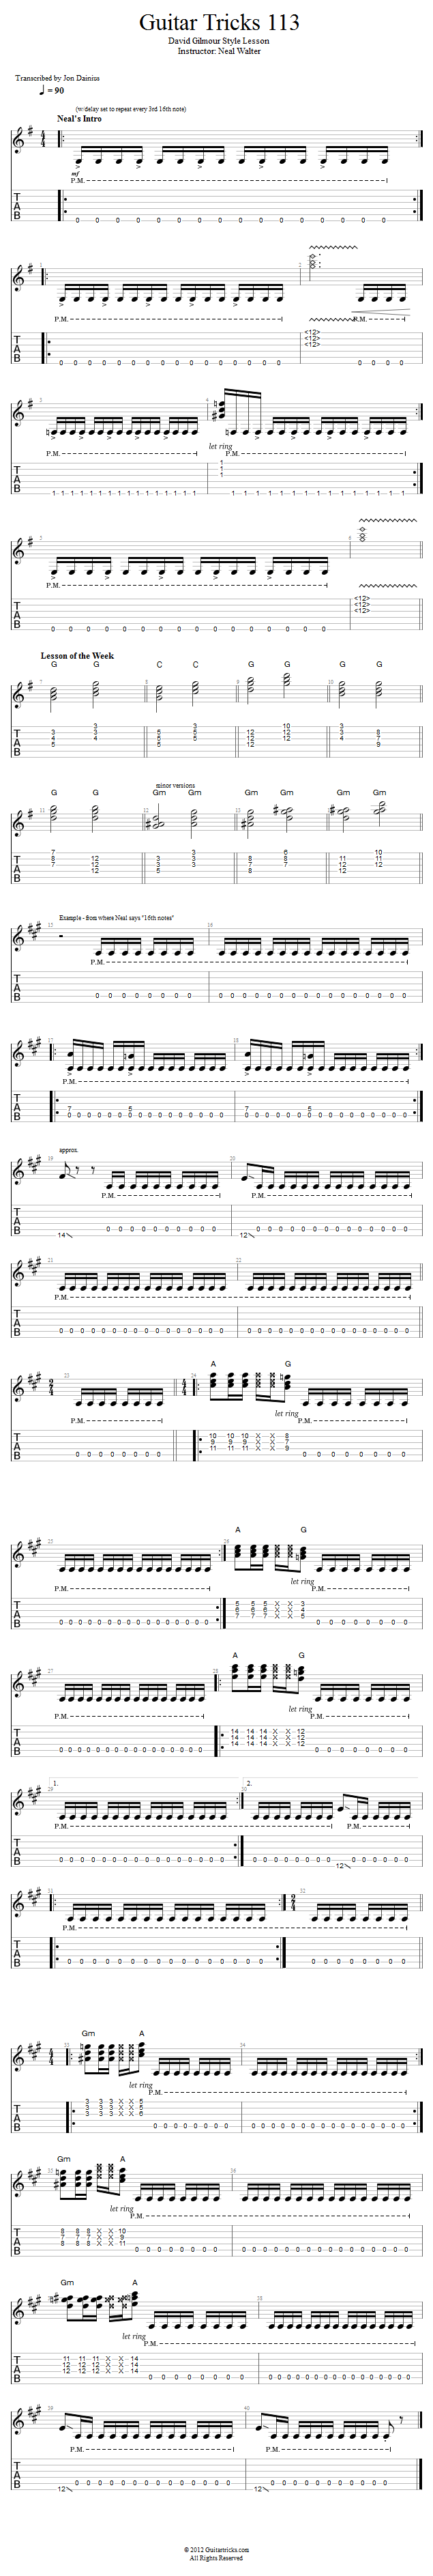 Guitar Tricks 113: David Gilmour Style Lesson song notation